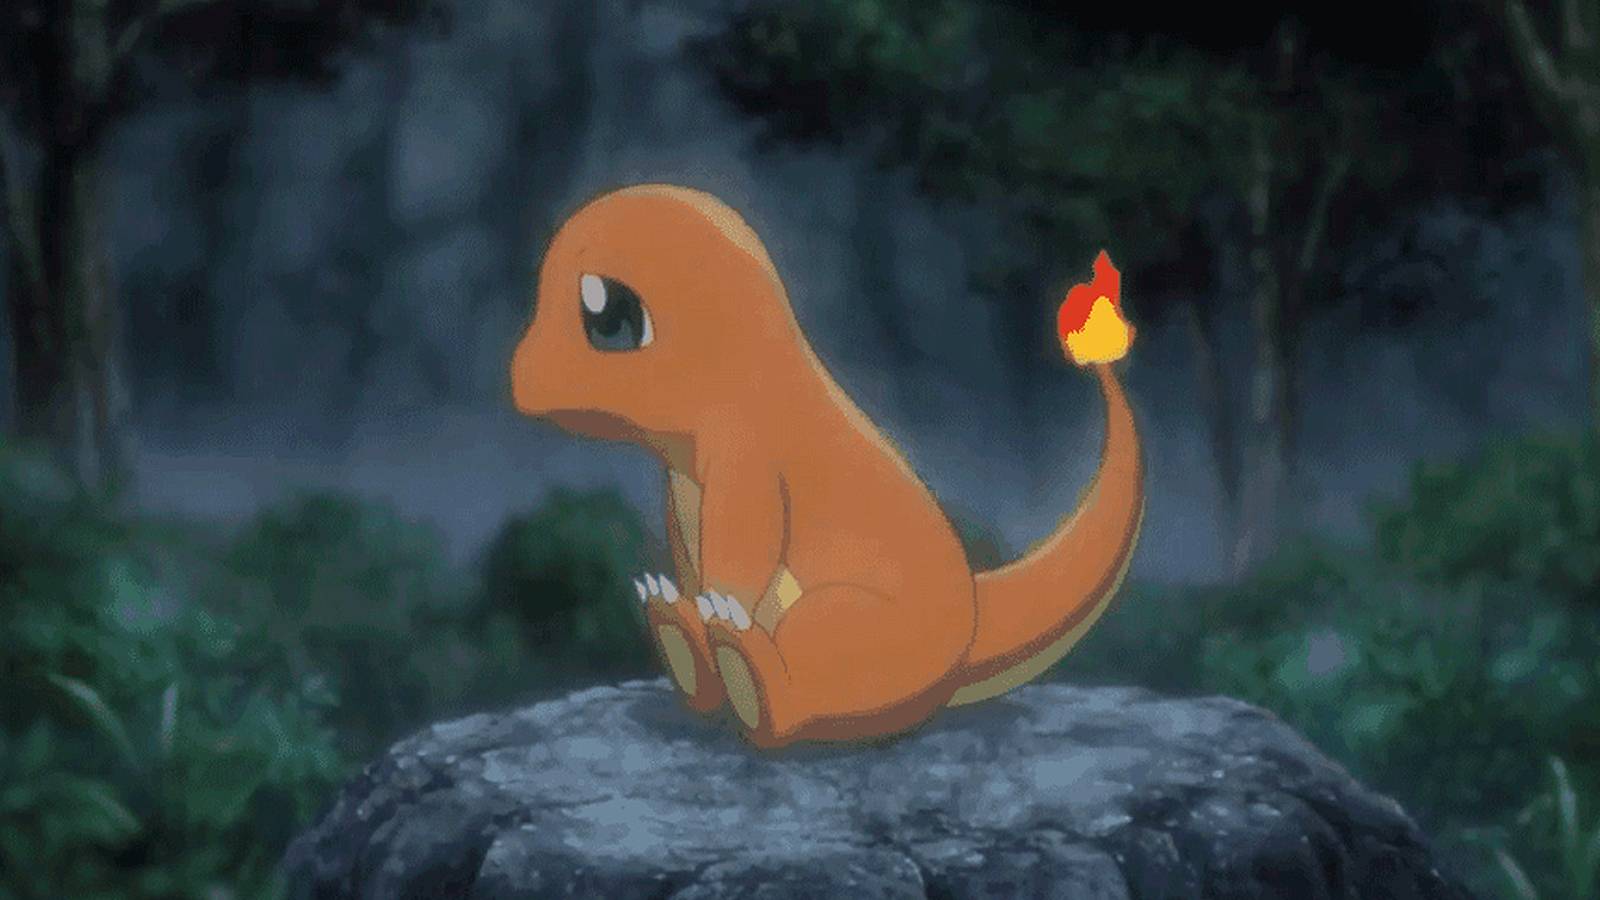 A screenshot from the movie Pokemon: I Choose You! shows a Charmander waiting on a rock in the rain